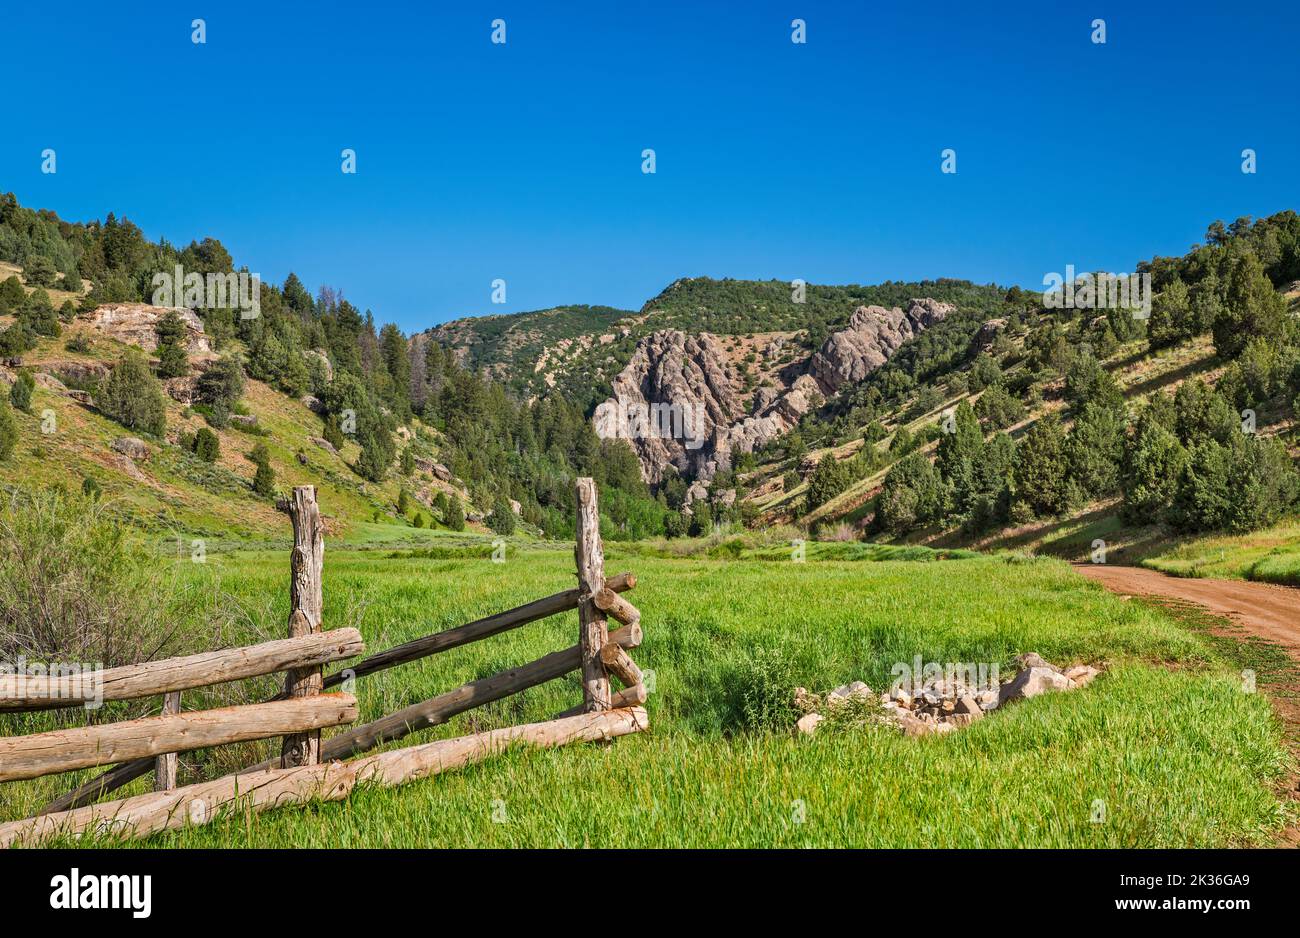 Rees Valley, Reddick Canyon in Distance, Chicken Creek Road, FR 101, San Pitch Mountains, Uinta National Forest, Utah, Stati Uniti Foto Stock